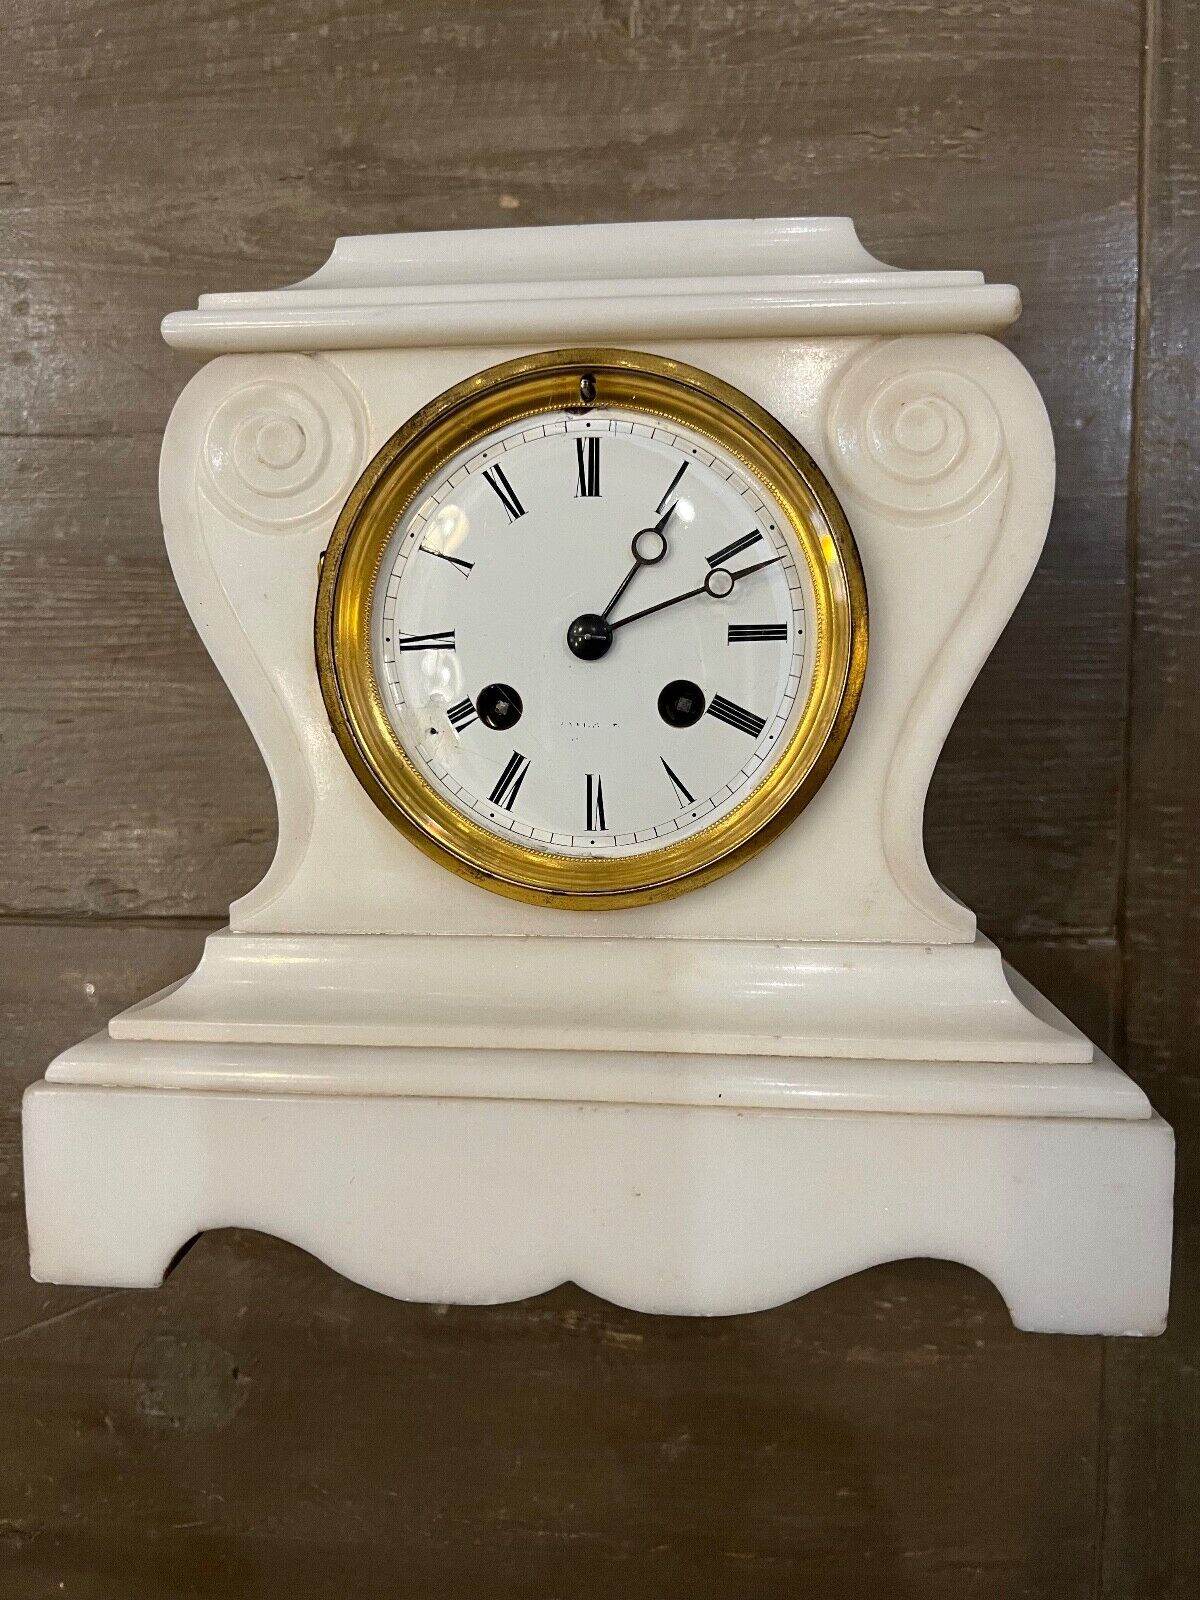 Antique Mantle Clock French White Marble Cased Japy Freres Movement. Rare design